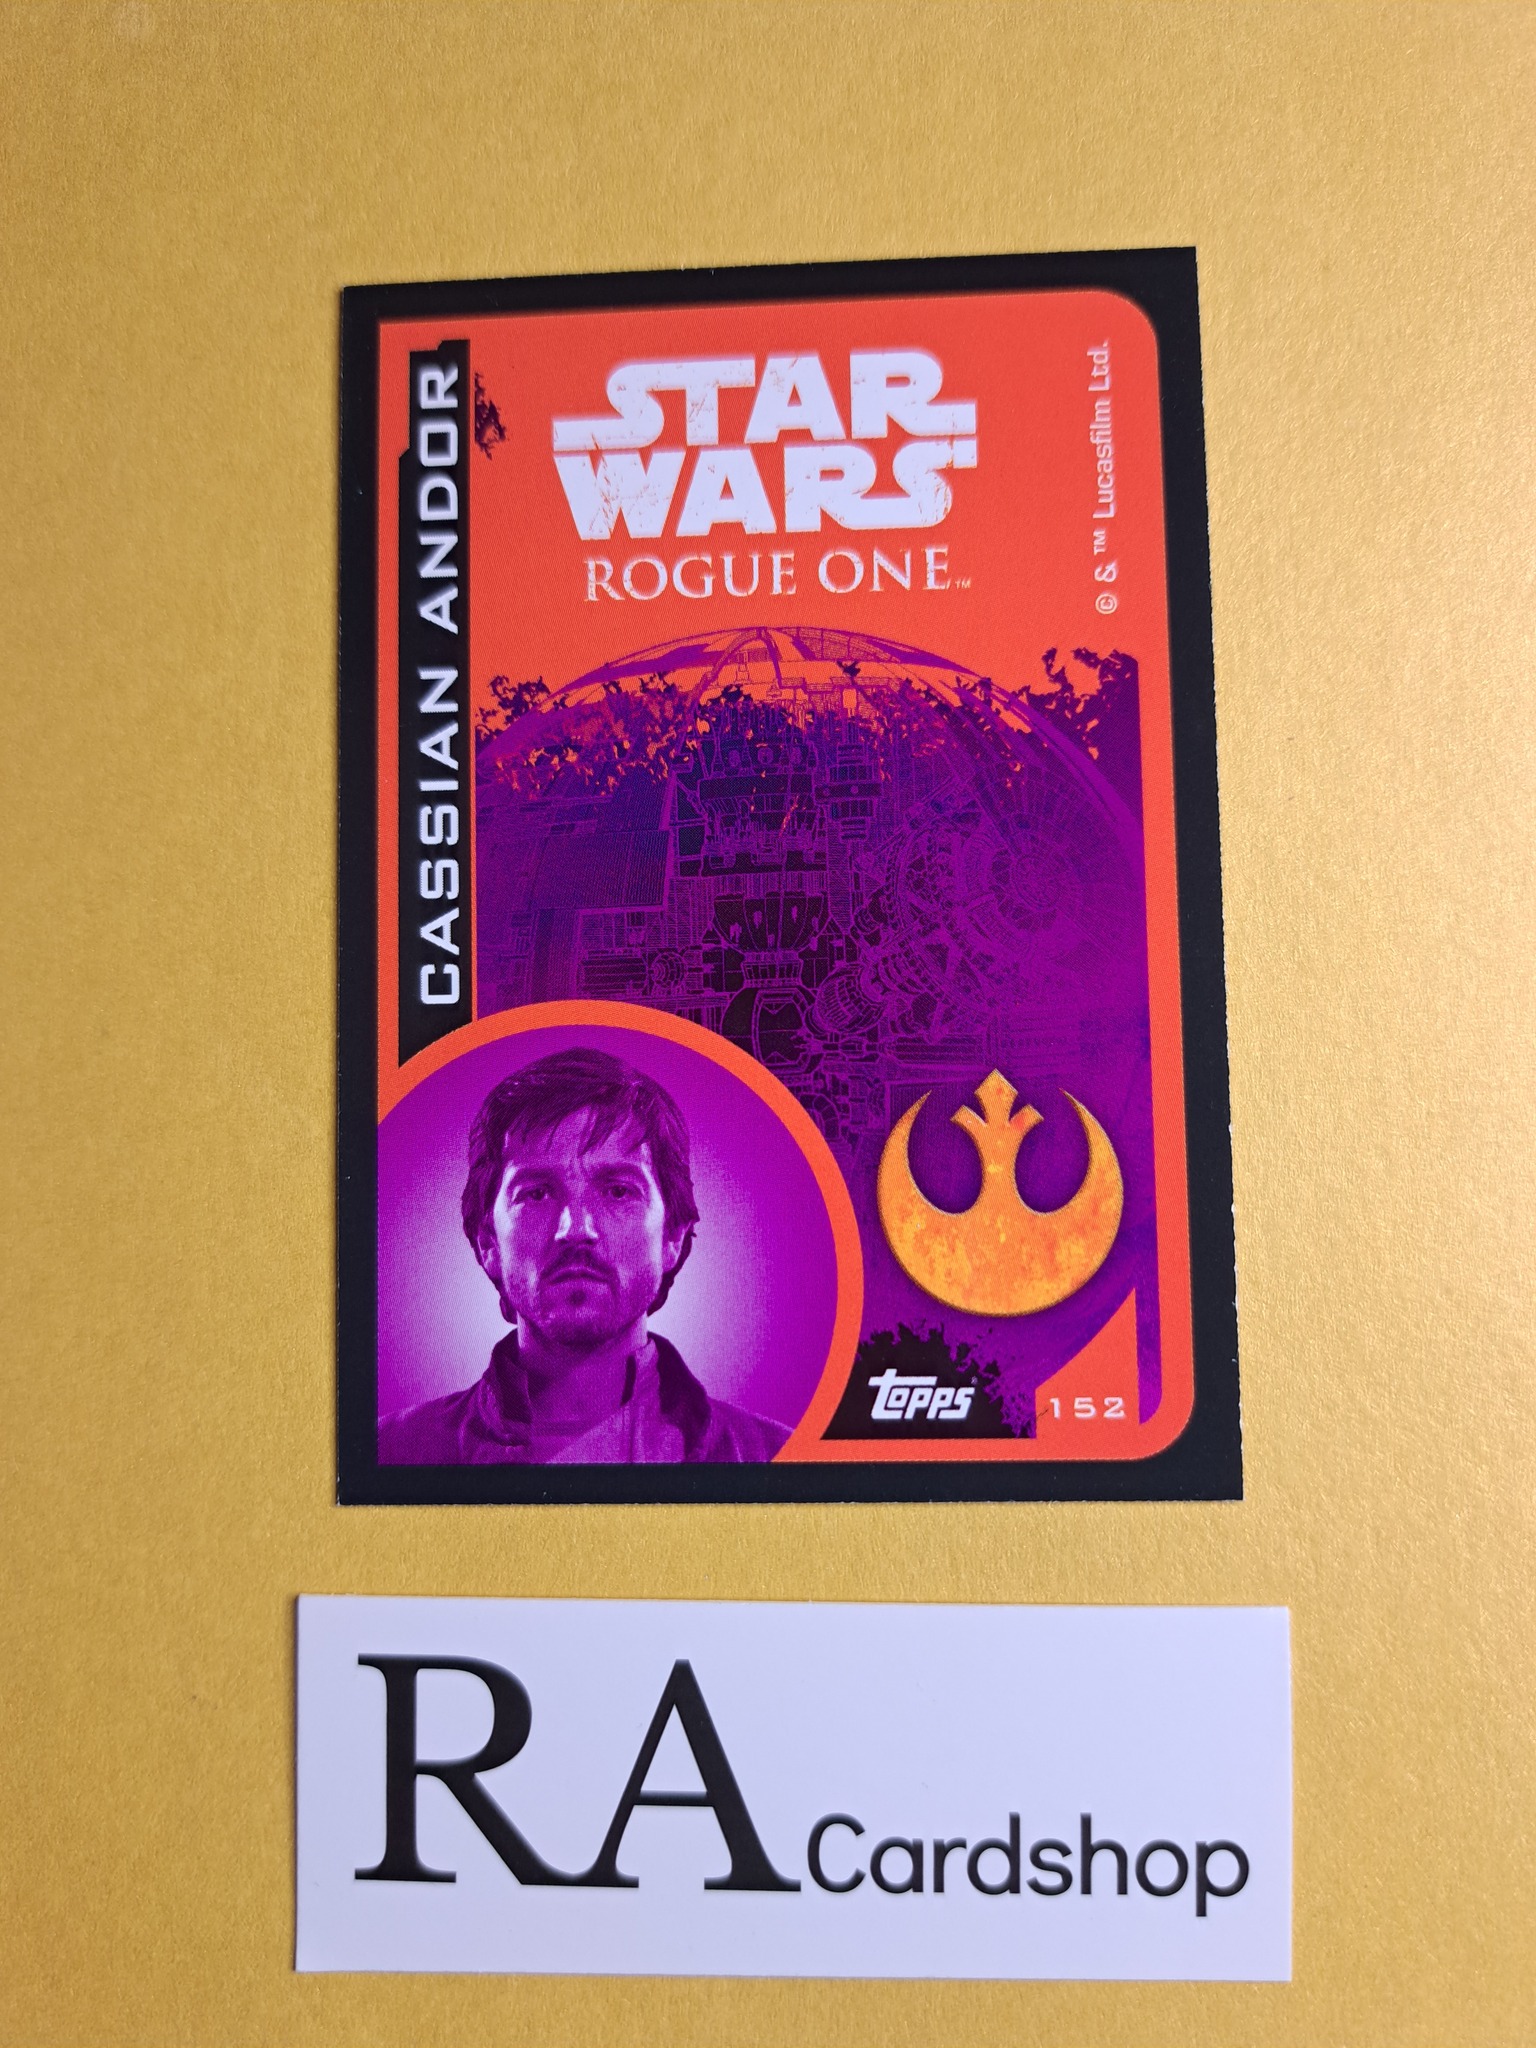 Cassian Andor #152 Rogue One Topps Star Wars